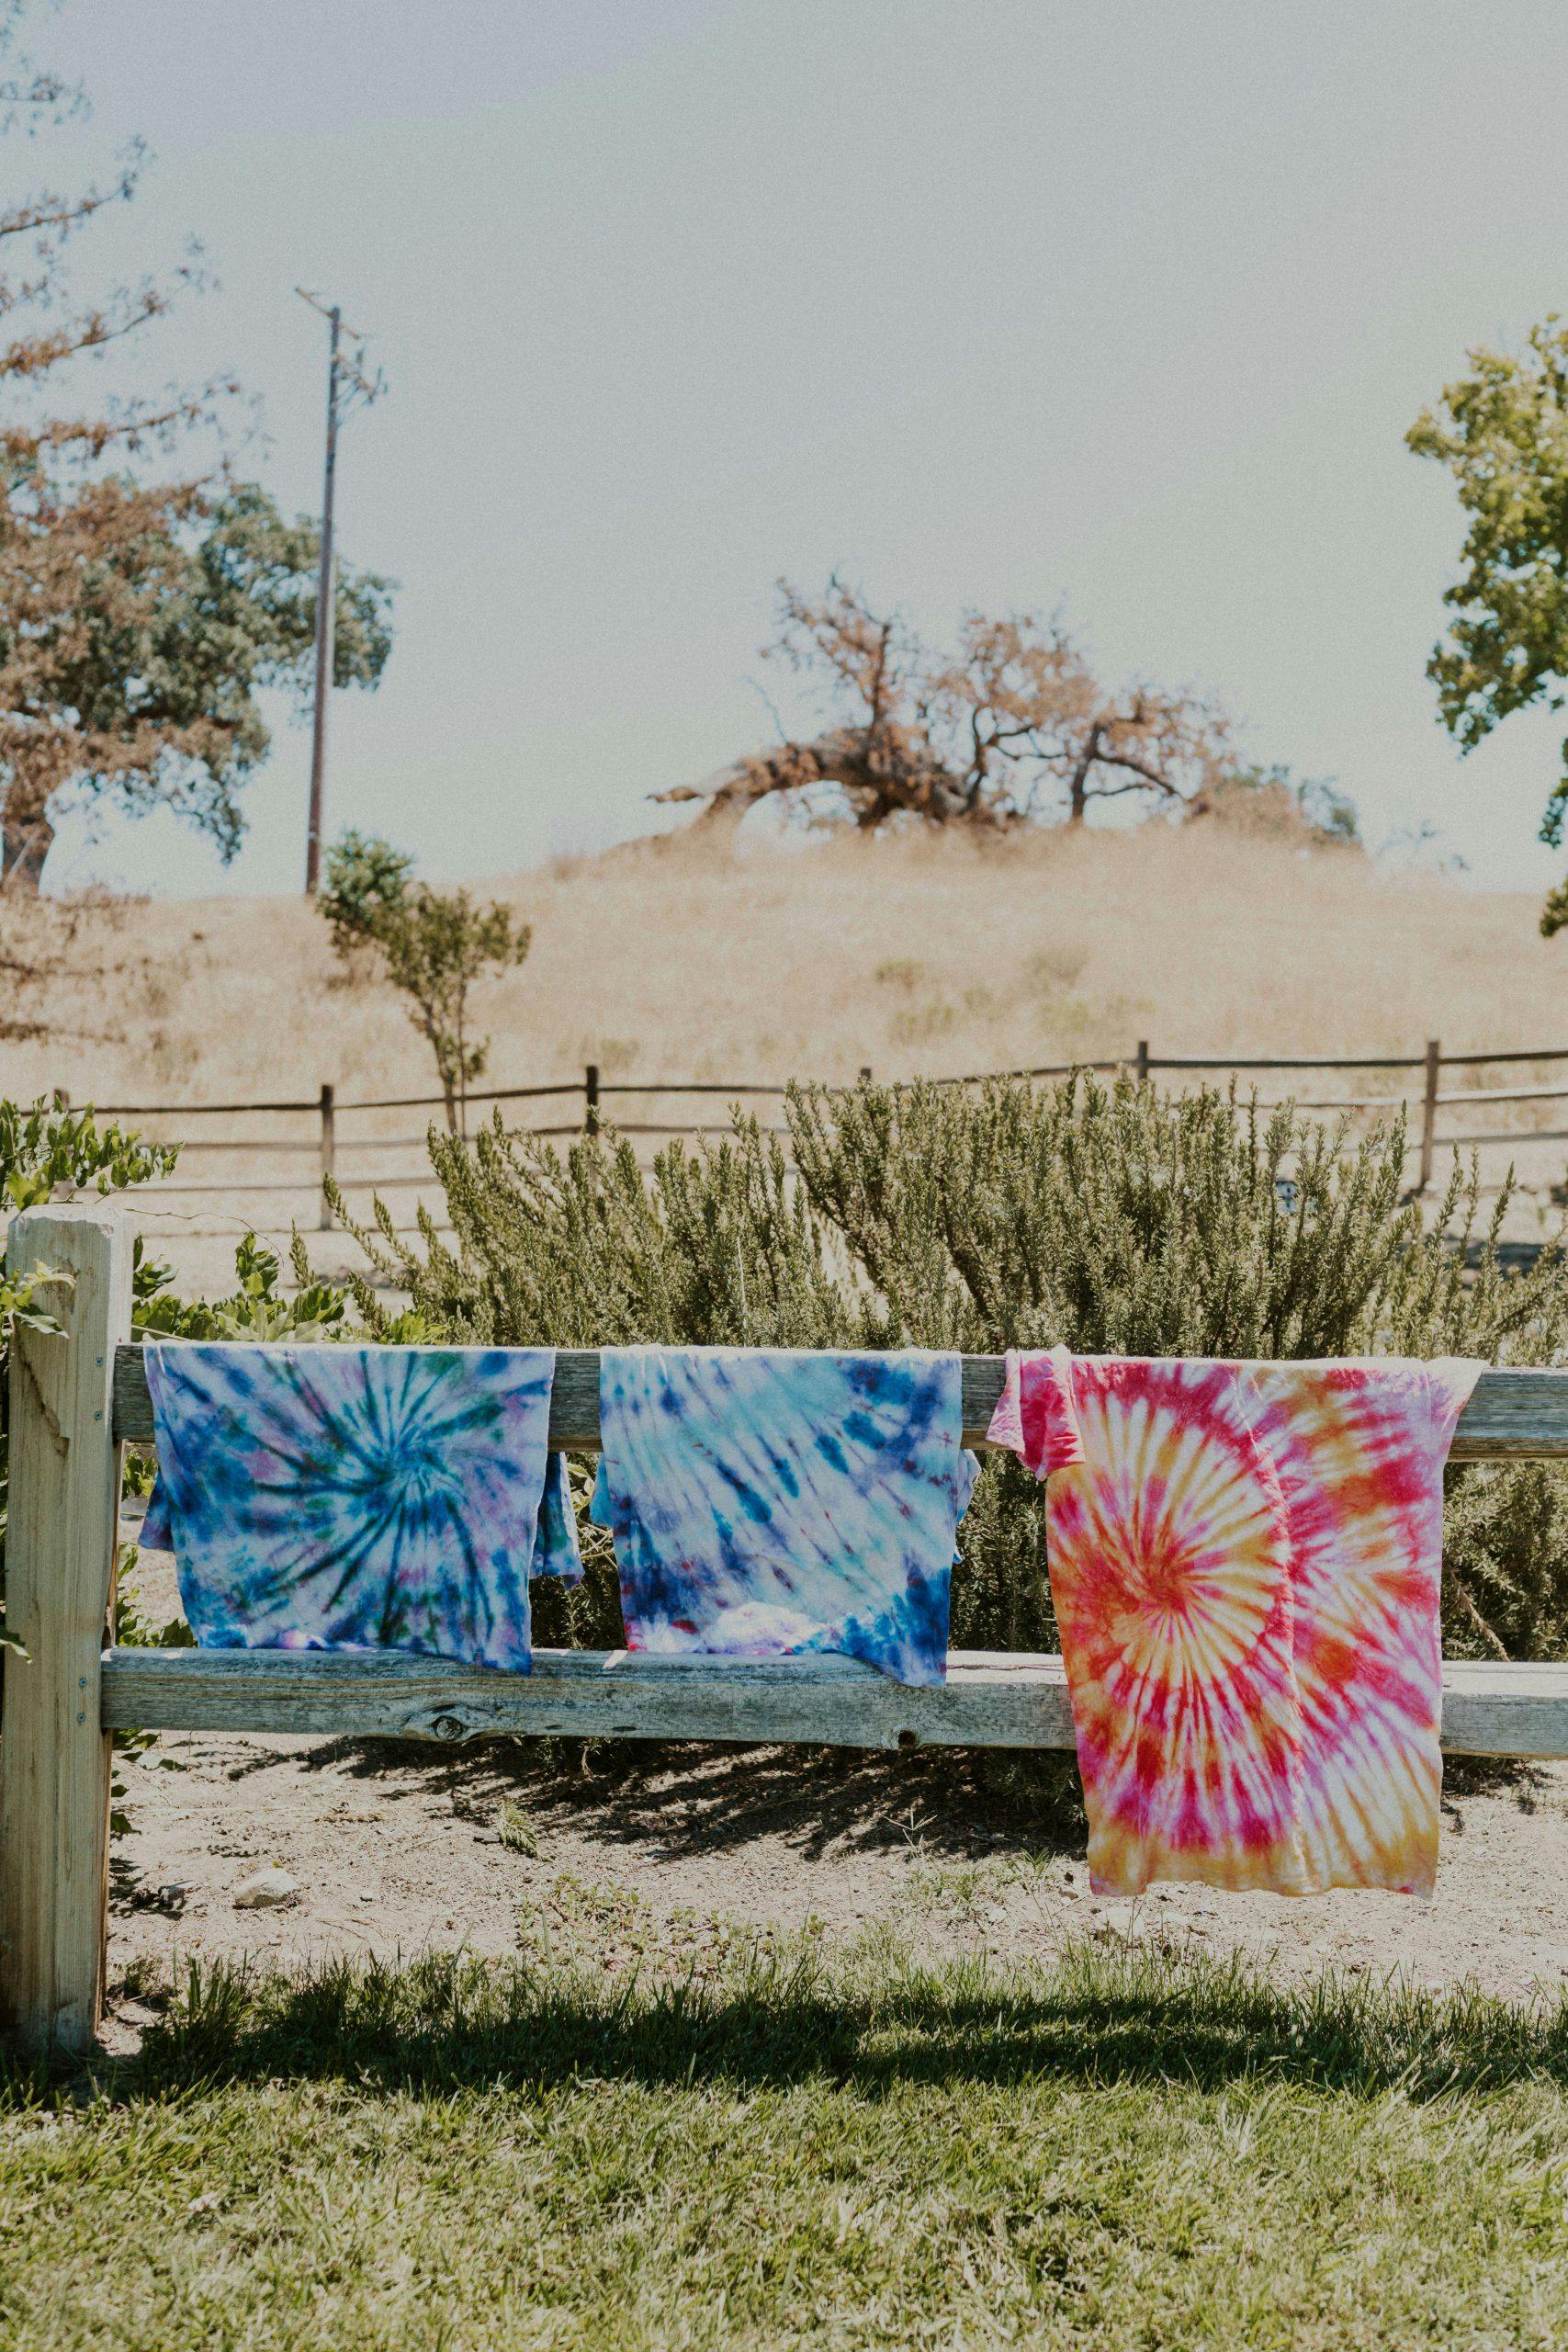 tie dyed shirts hanging on a fence